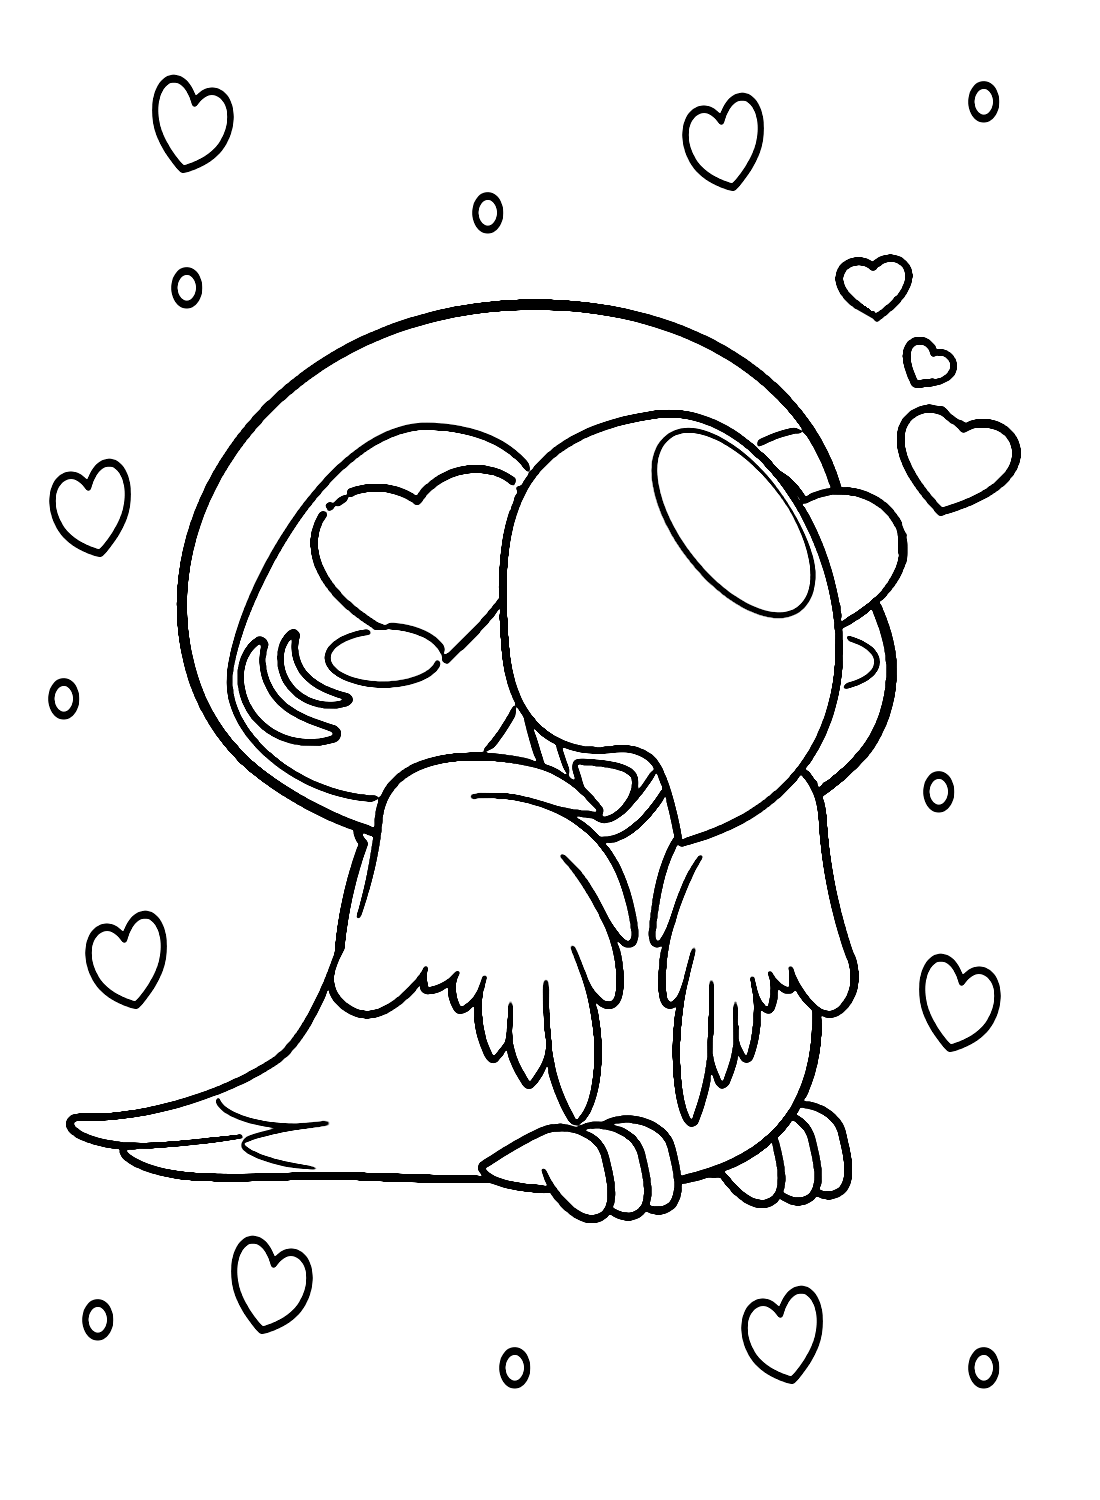 Macaw Love from Macaw